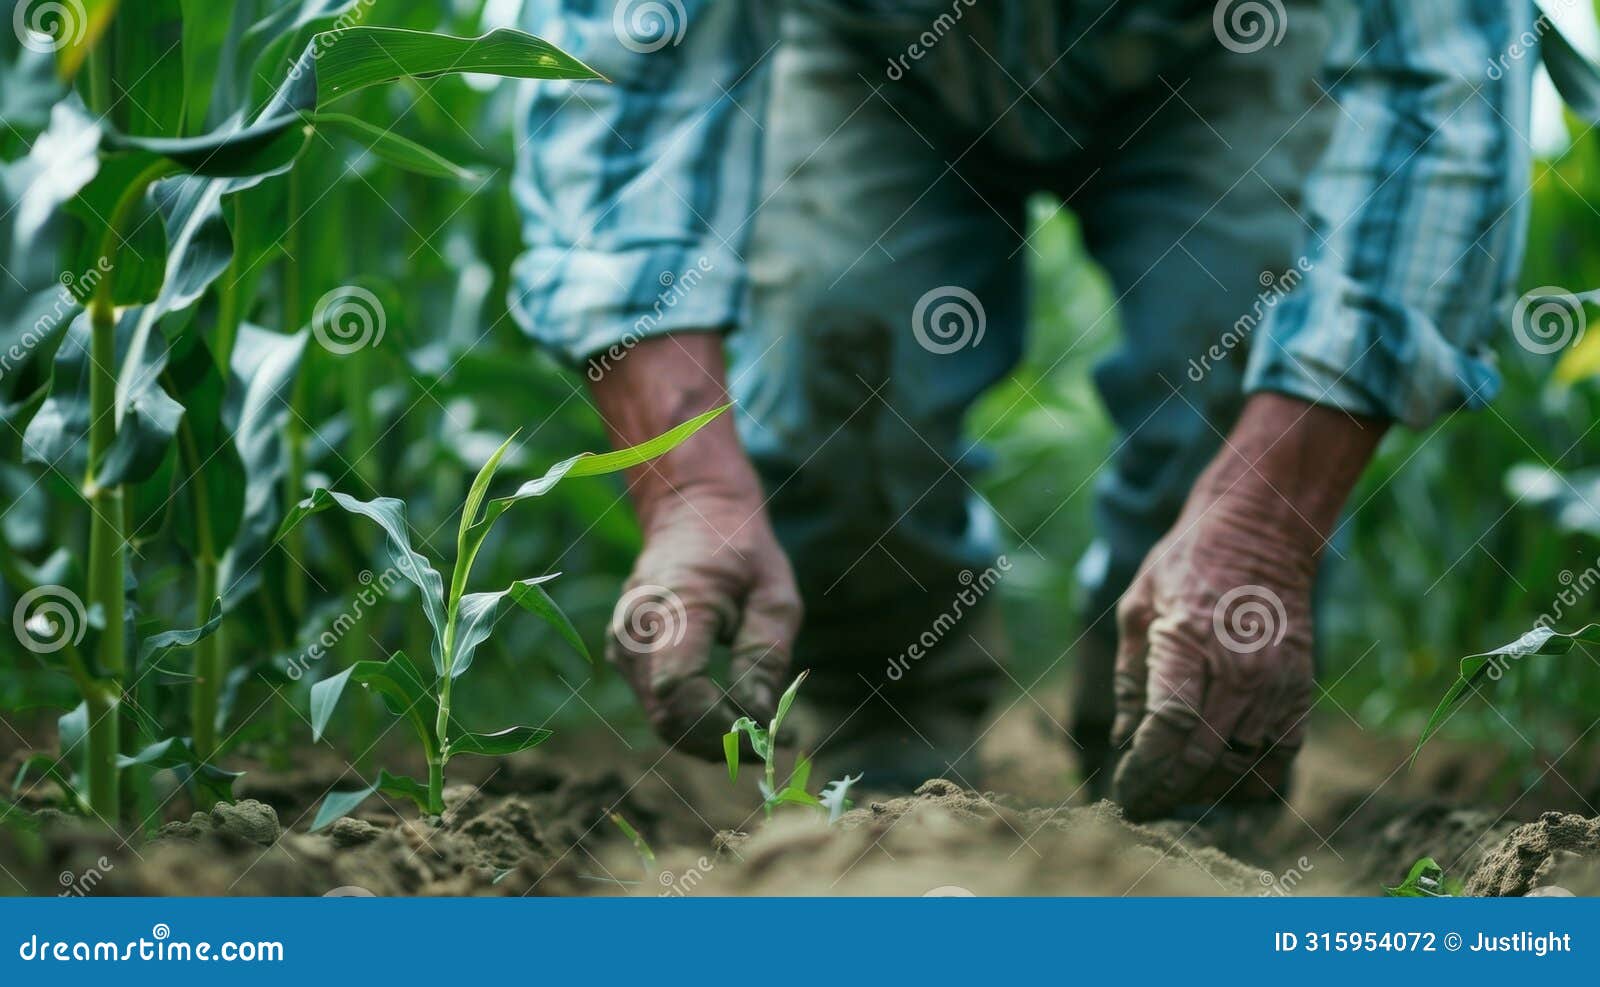 a farmer checks on their crops a mix of corn and soybeans which will be used to produce biofuels. as a steward of the